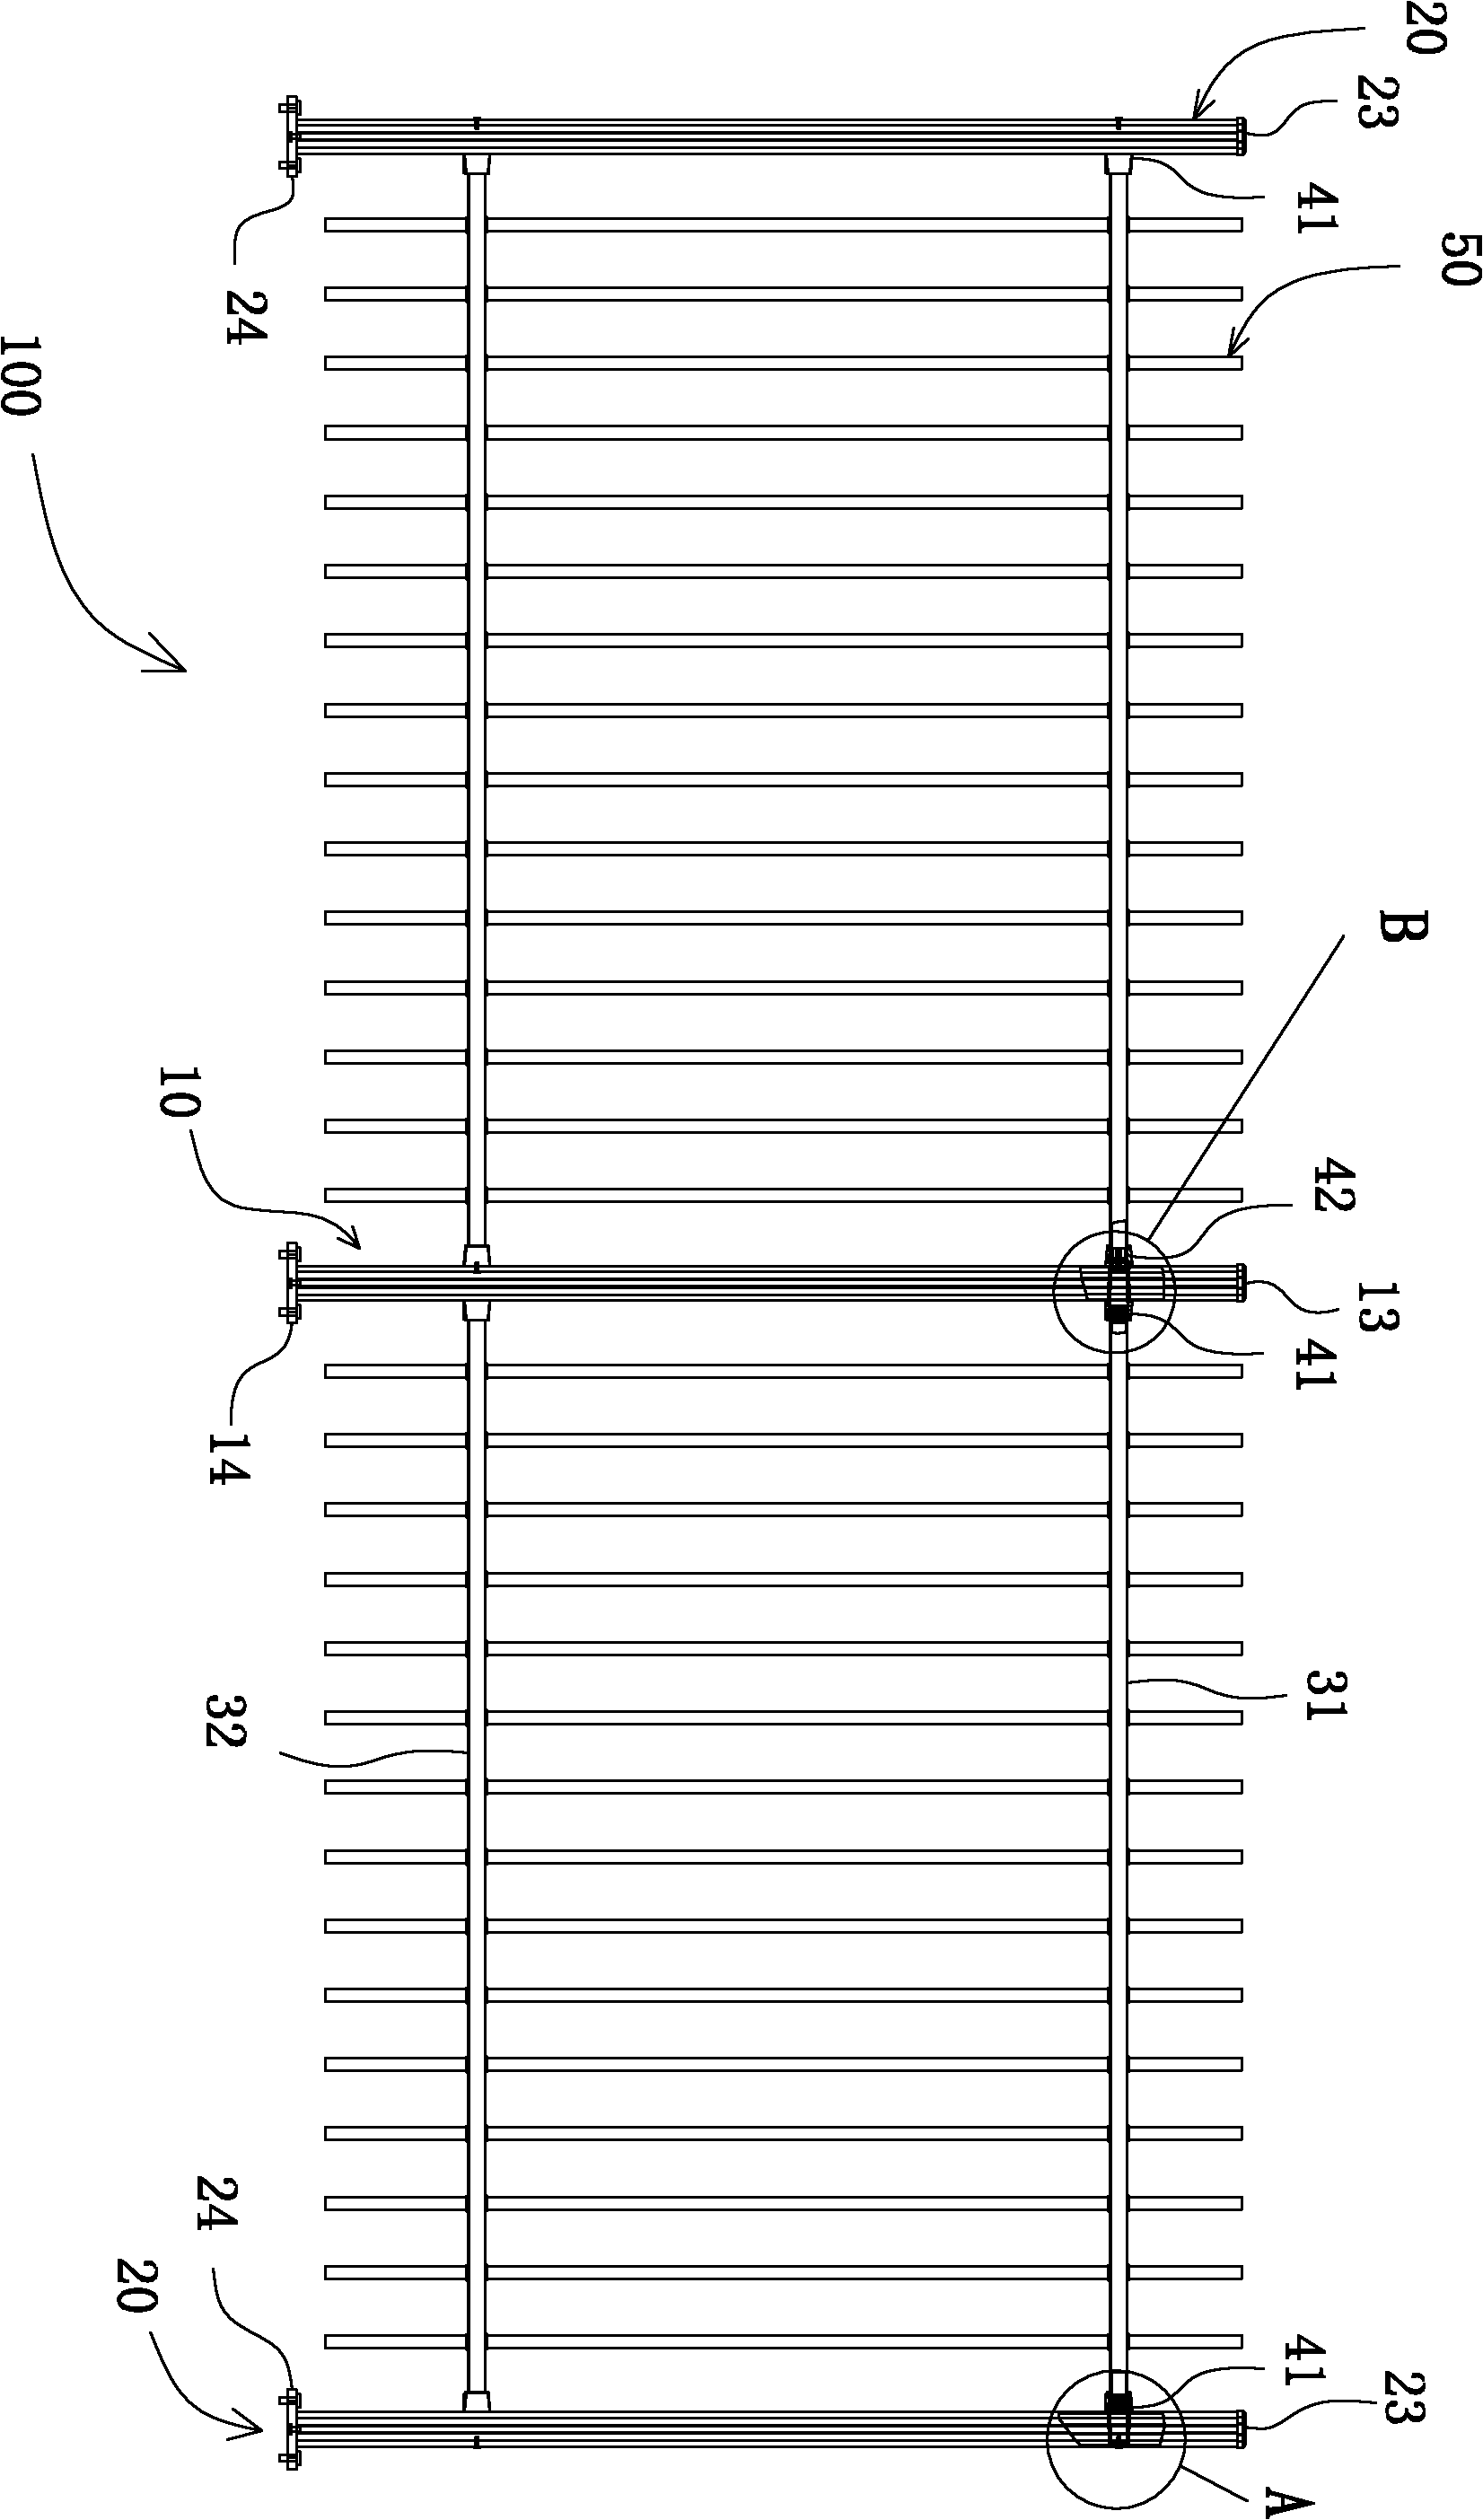 Separated assembly type gate